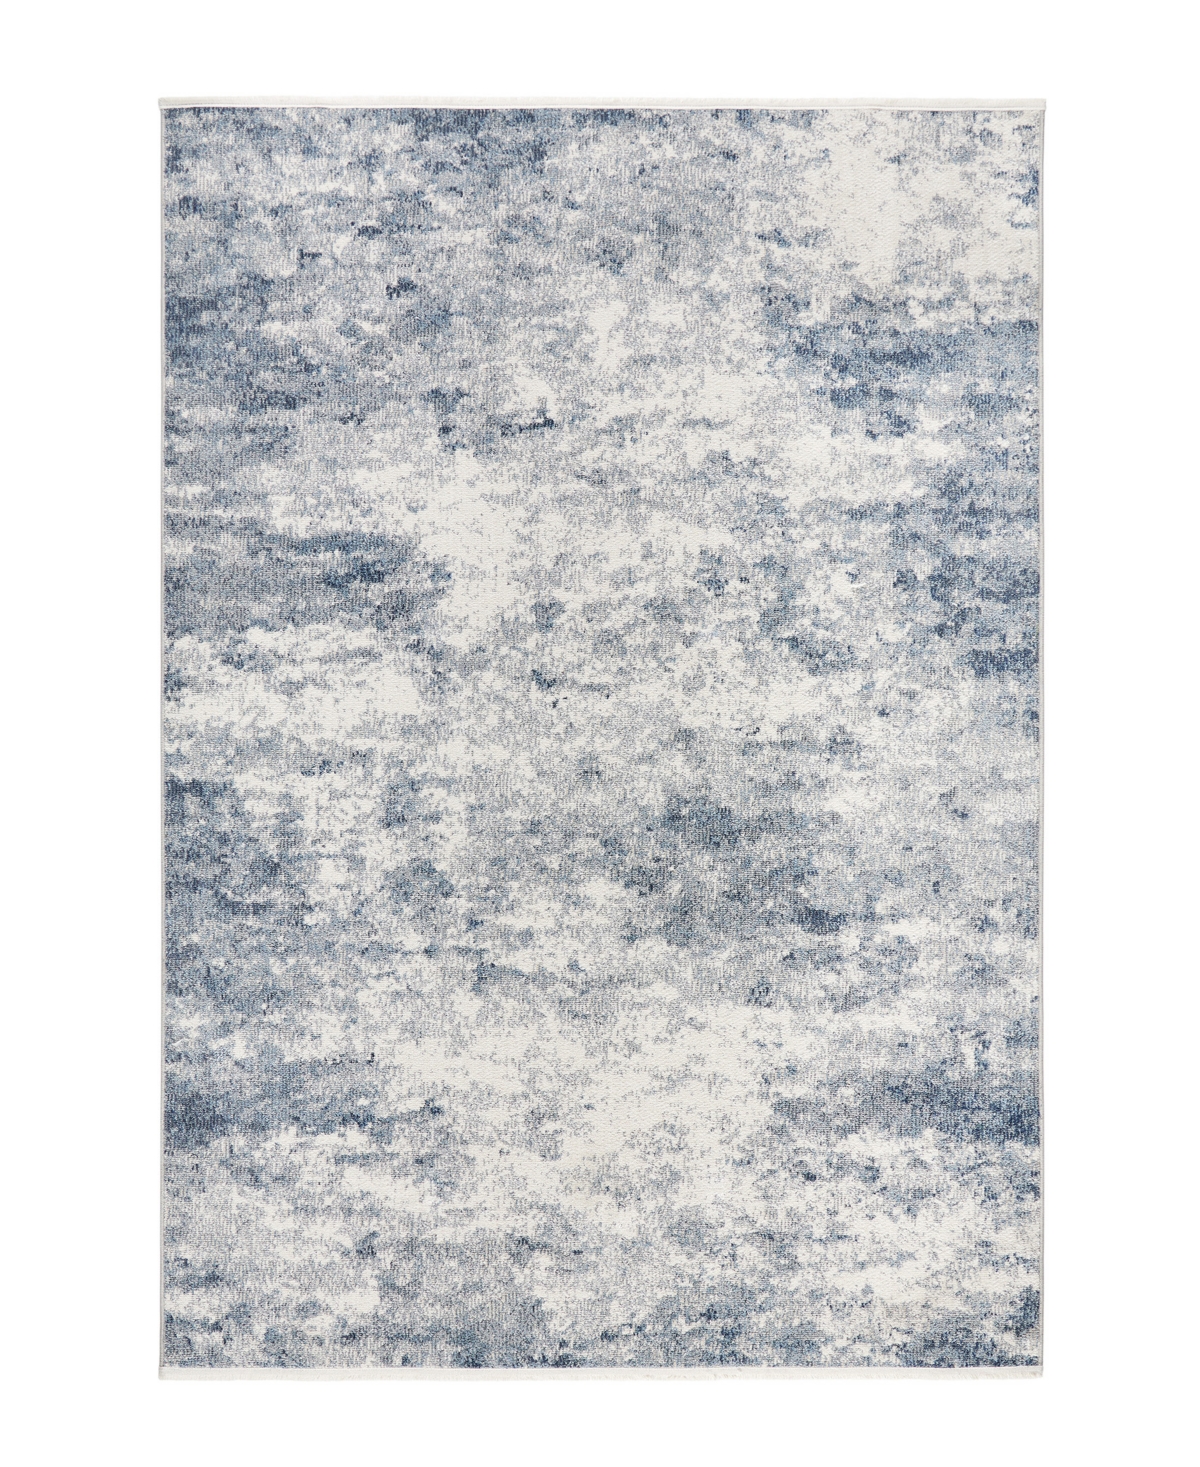 Town & Country Living Everyday Rein Everwash 12 6'6" X 9'6" Area Rug In Blue,gray